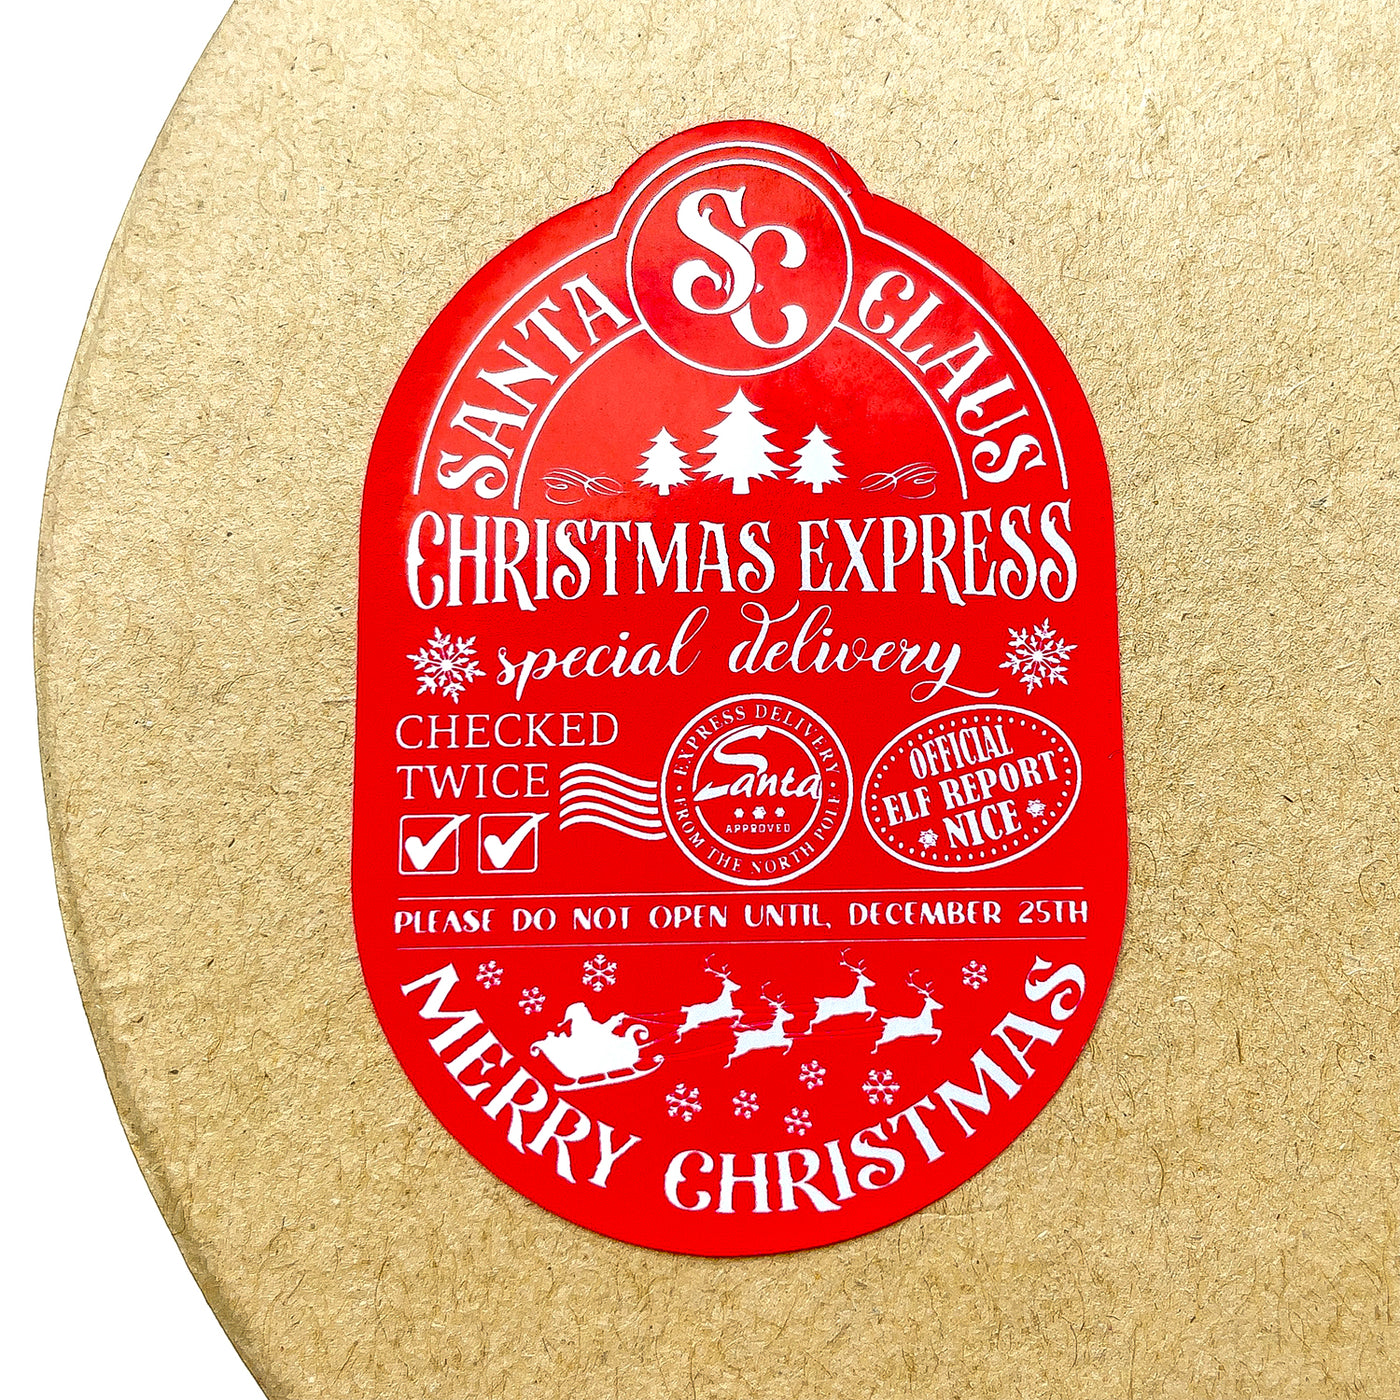 Santa Claus Express Delivery Seal Stickers Shaped